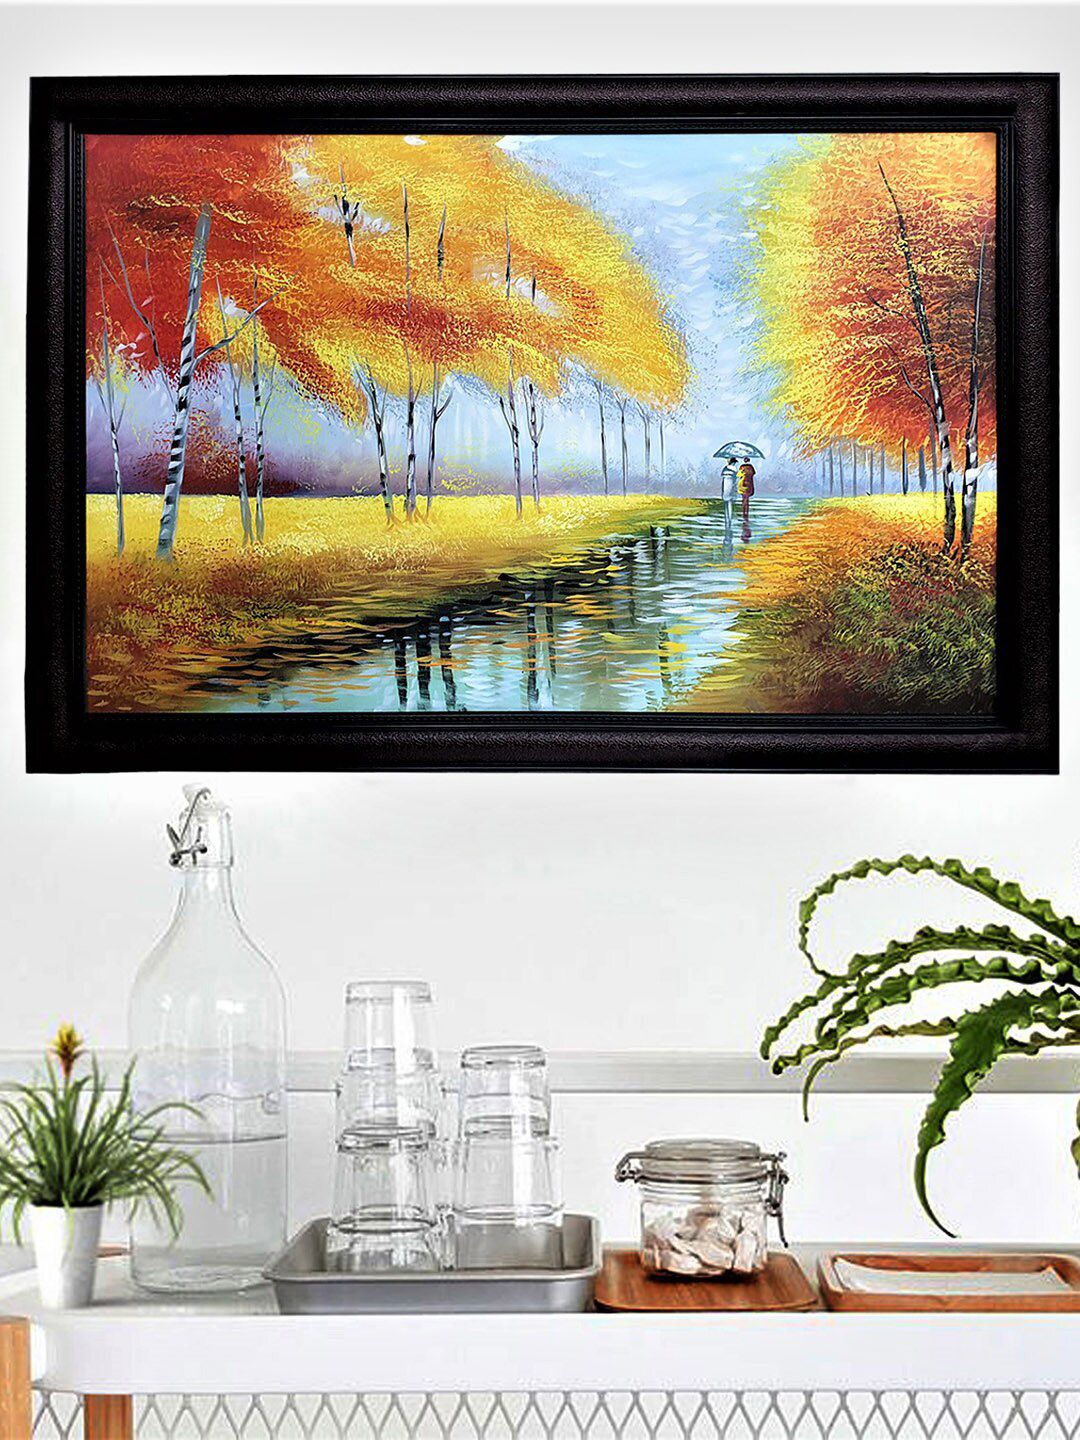 Gallery99 Yellow Handmade Framed Oil Painting Price in India